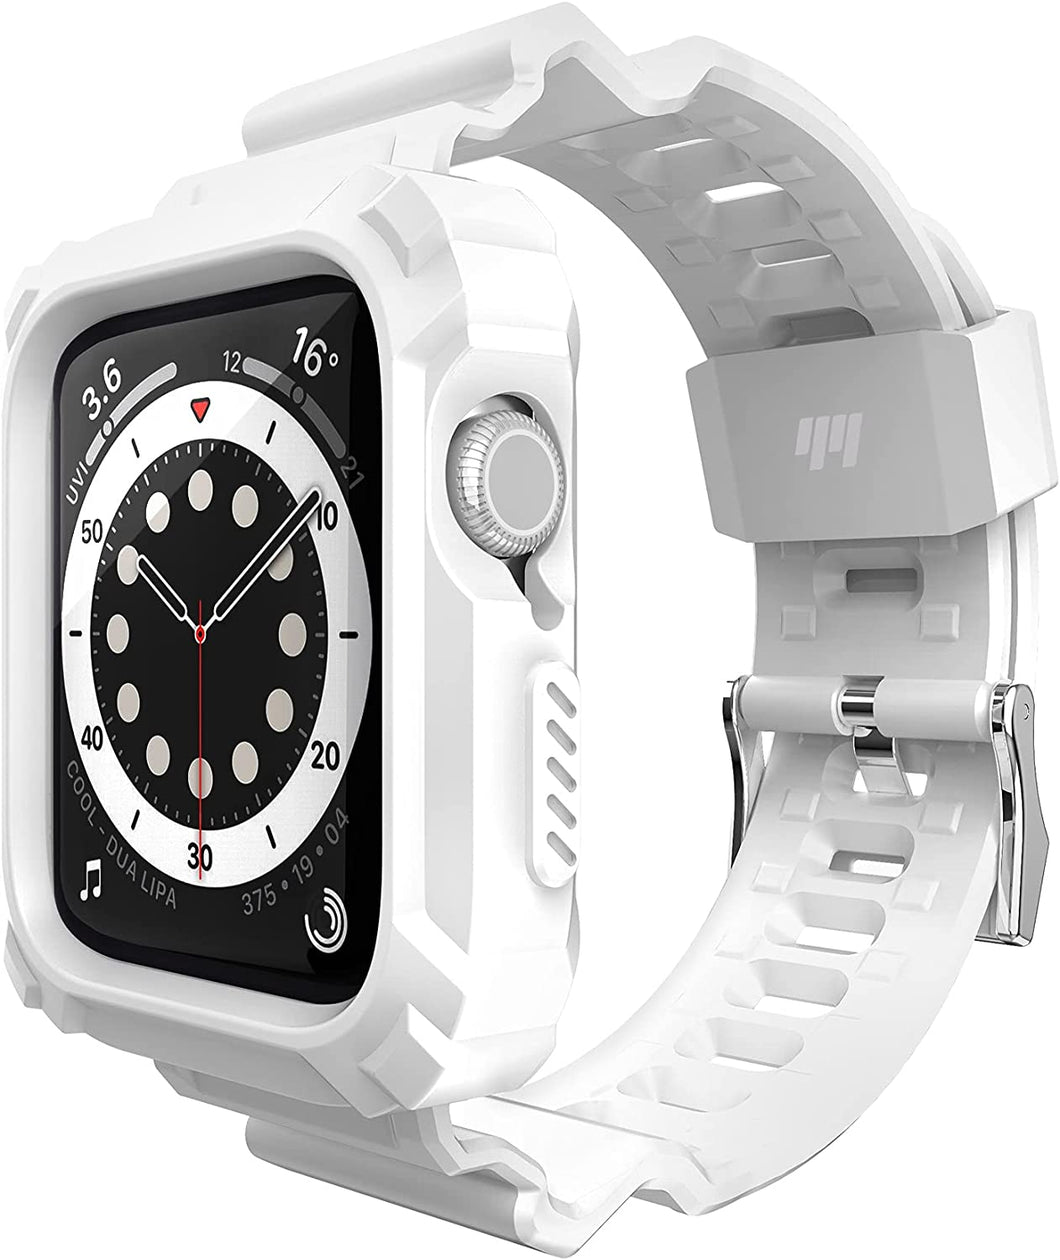 A6054，Compatible for Apple Watch Band with Bumper Case (Mixed size and Color)